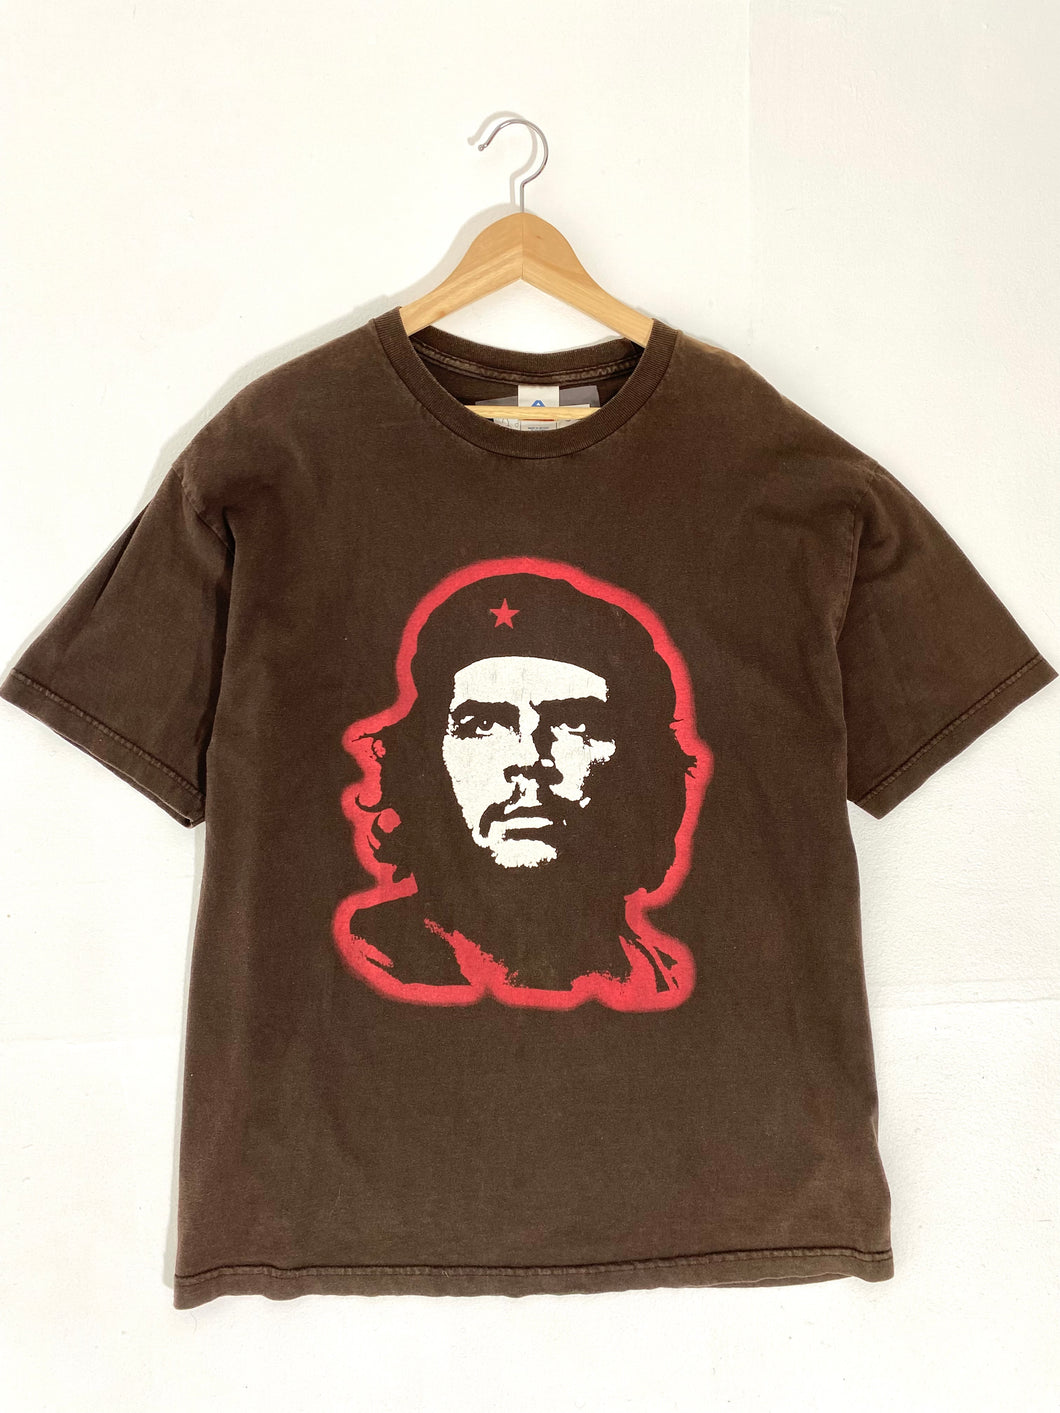 Che Guevara Unisex T-Shirt Black on Red (Small) 